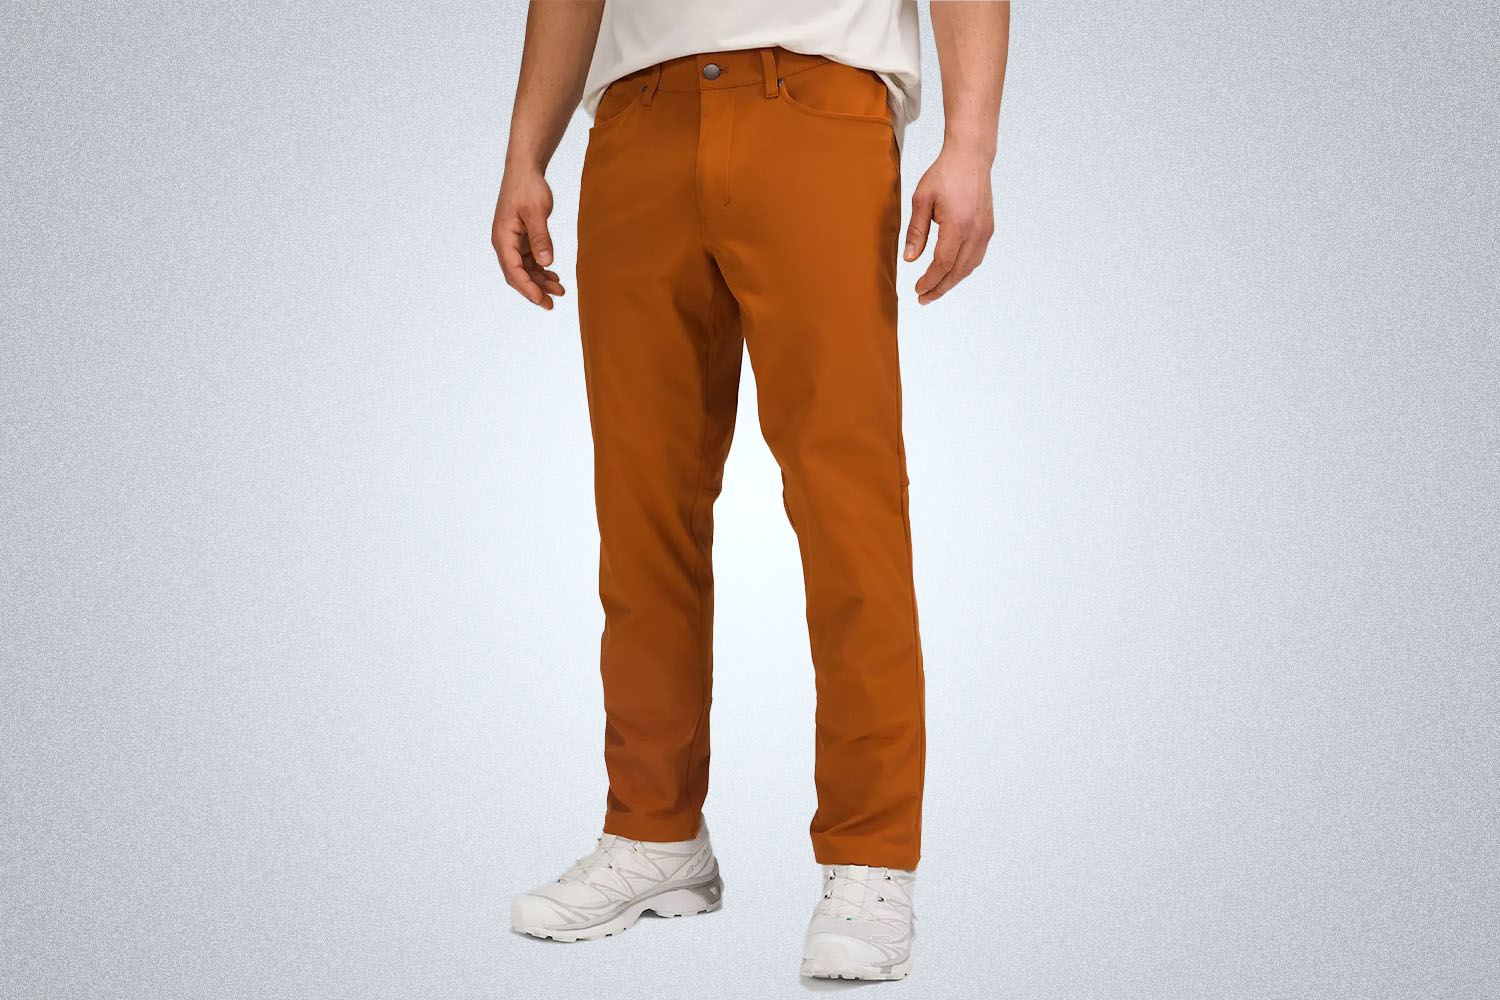 a tan pair of pants from the lululemon we've made too much sale on a model on a grey background